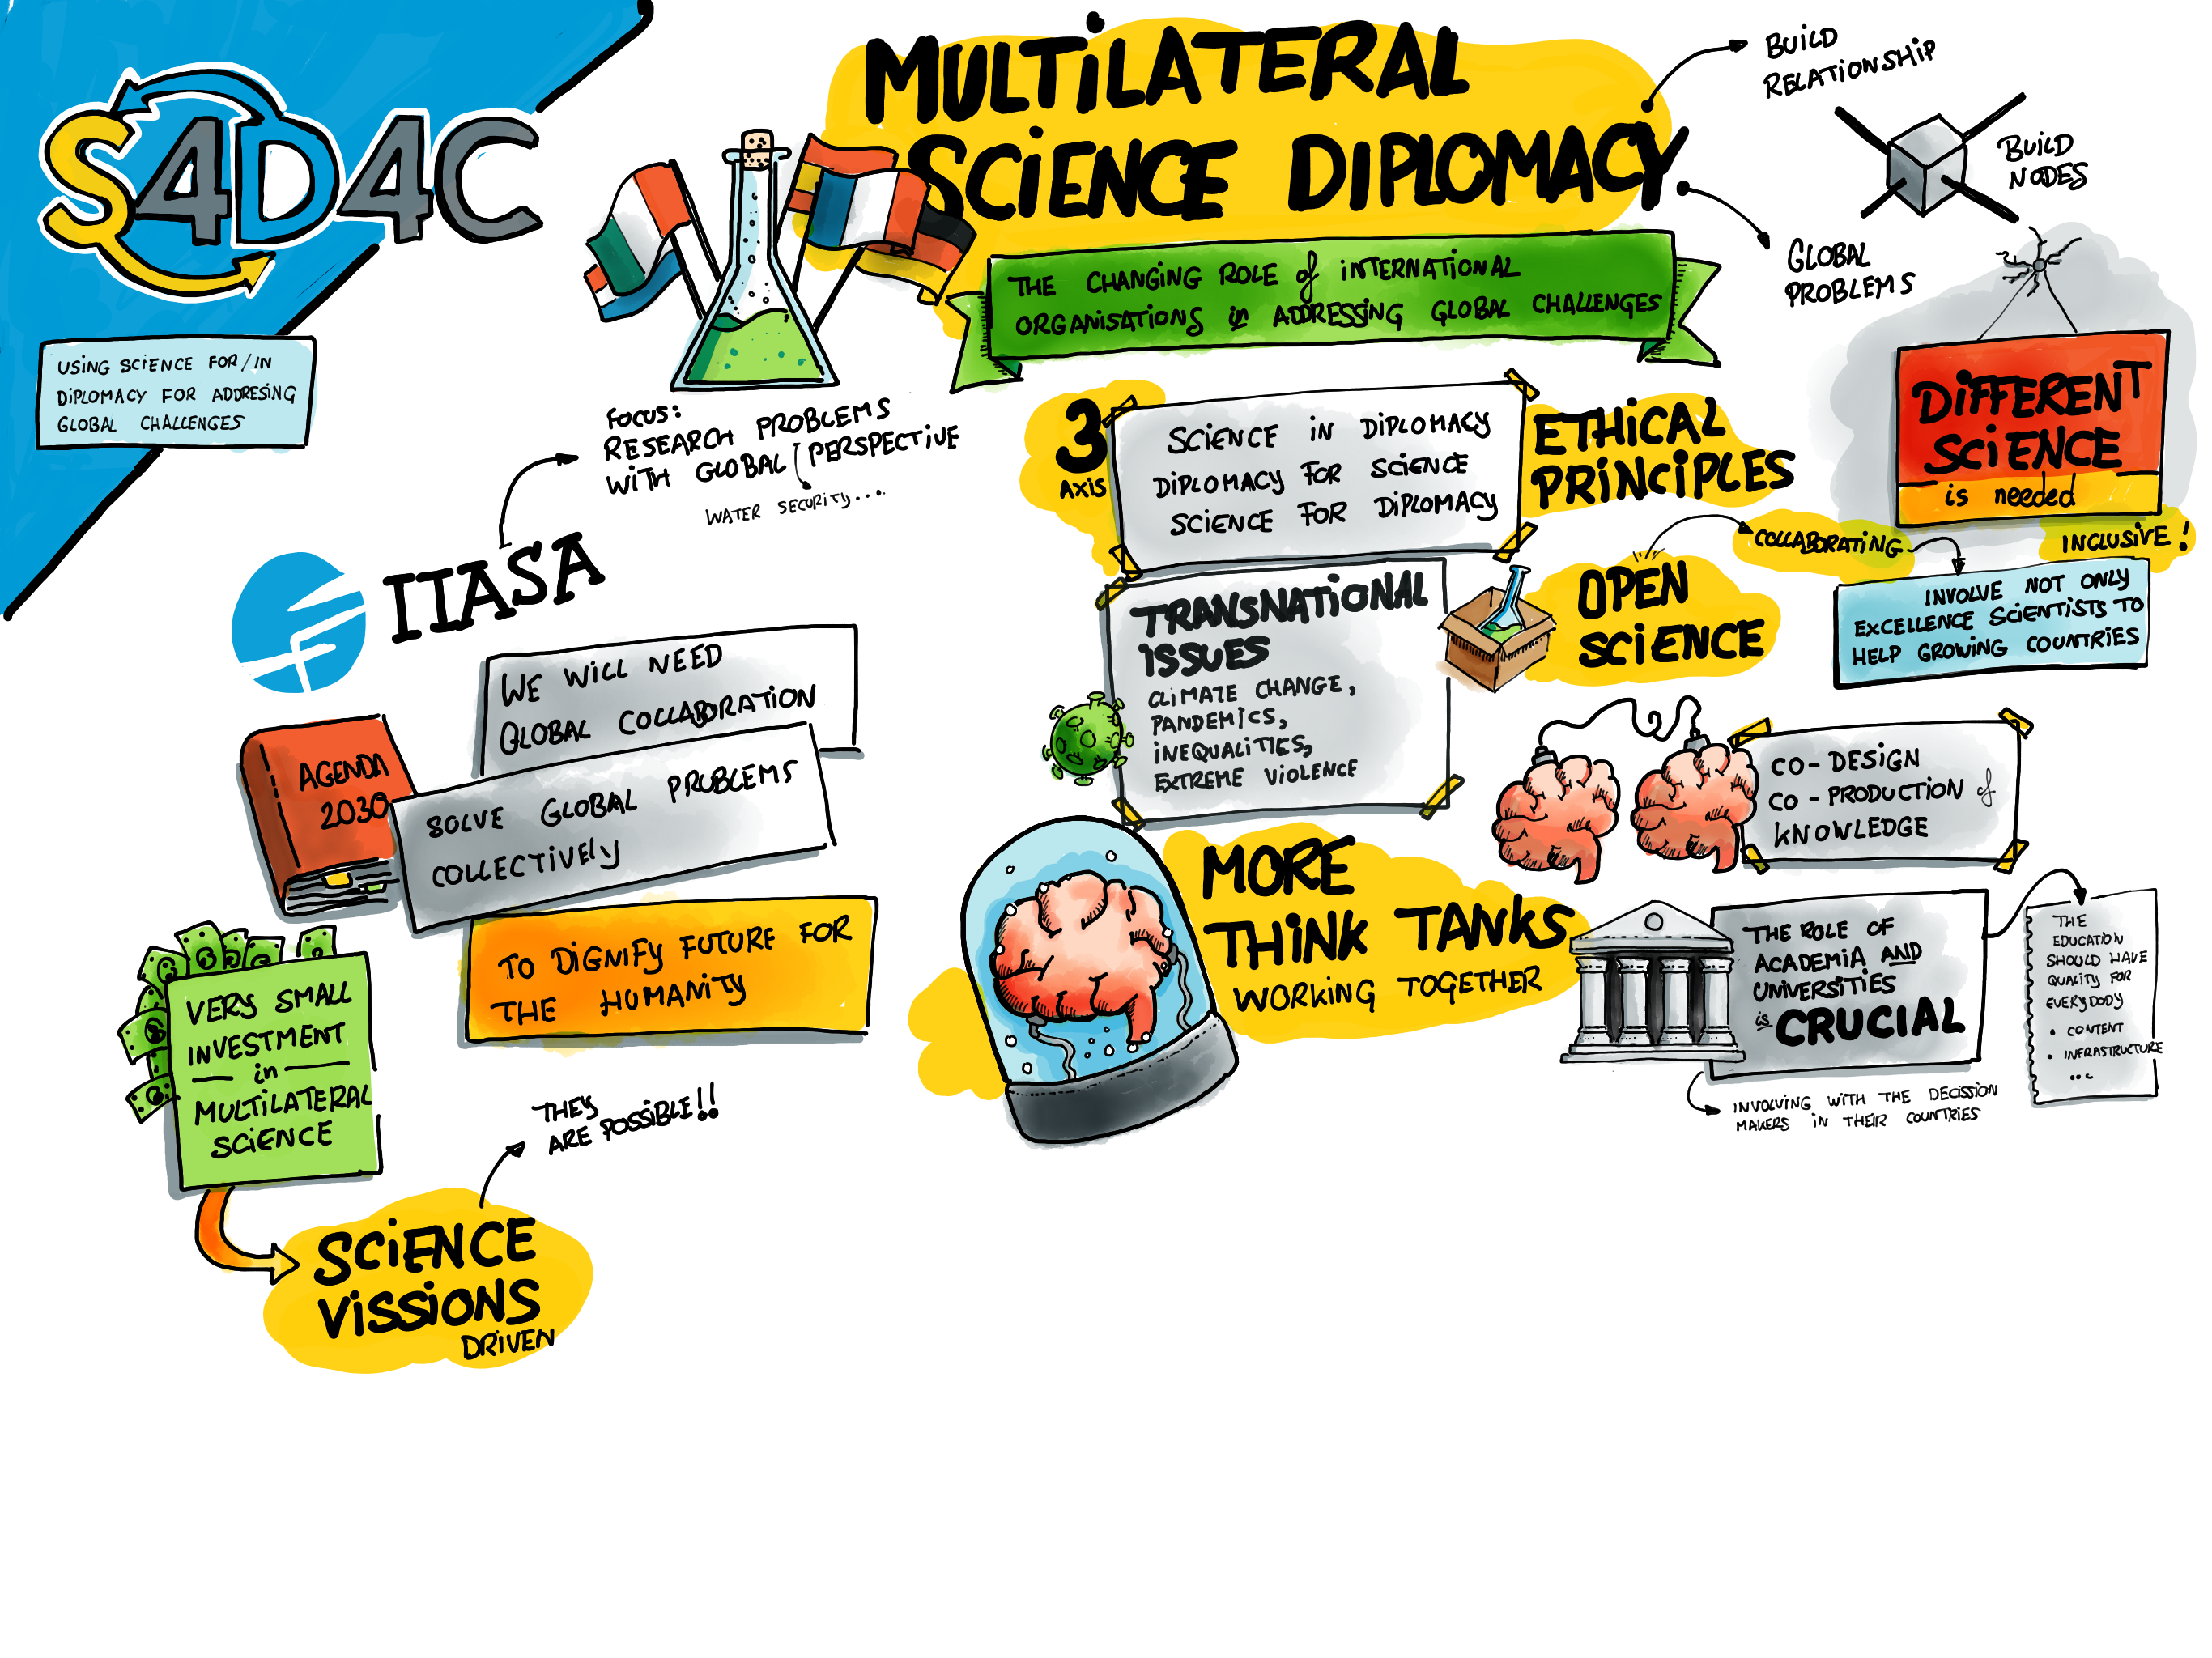 Day 3 - Multilateral SD - 17 March